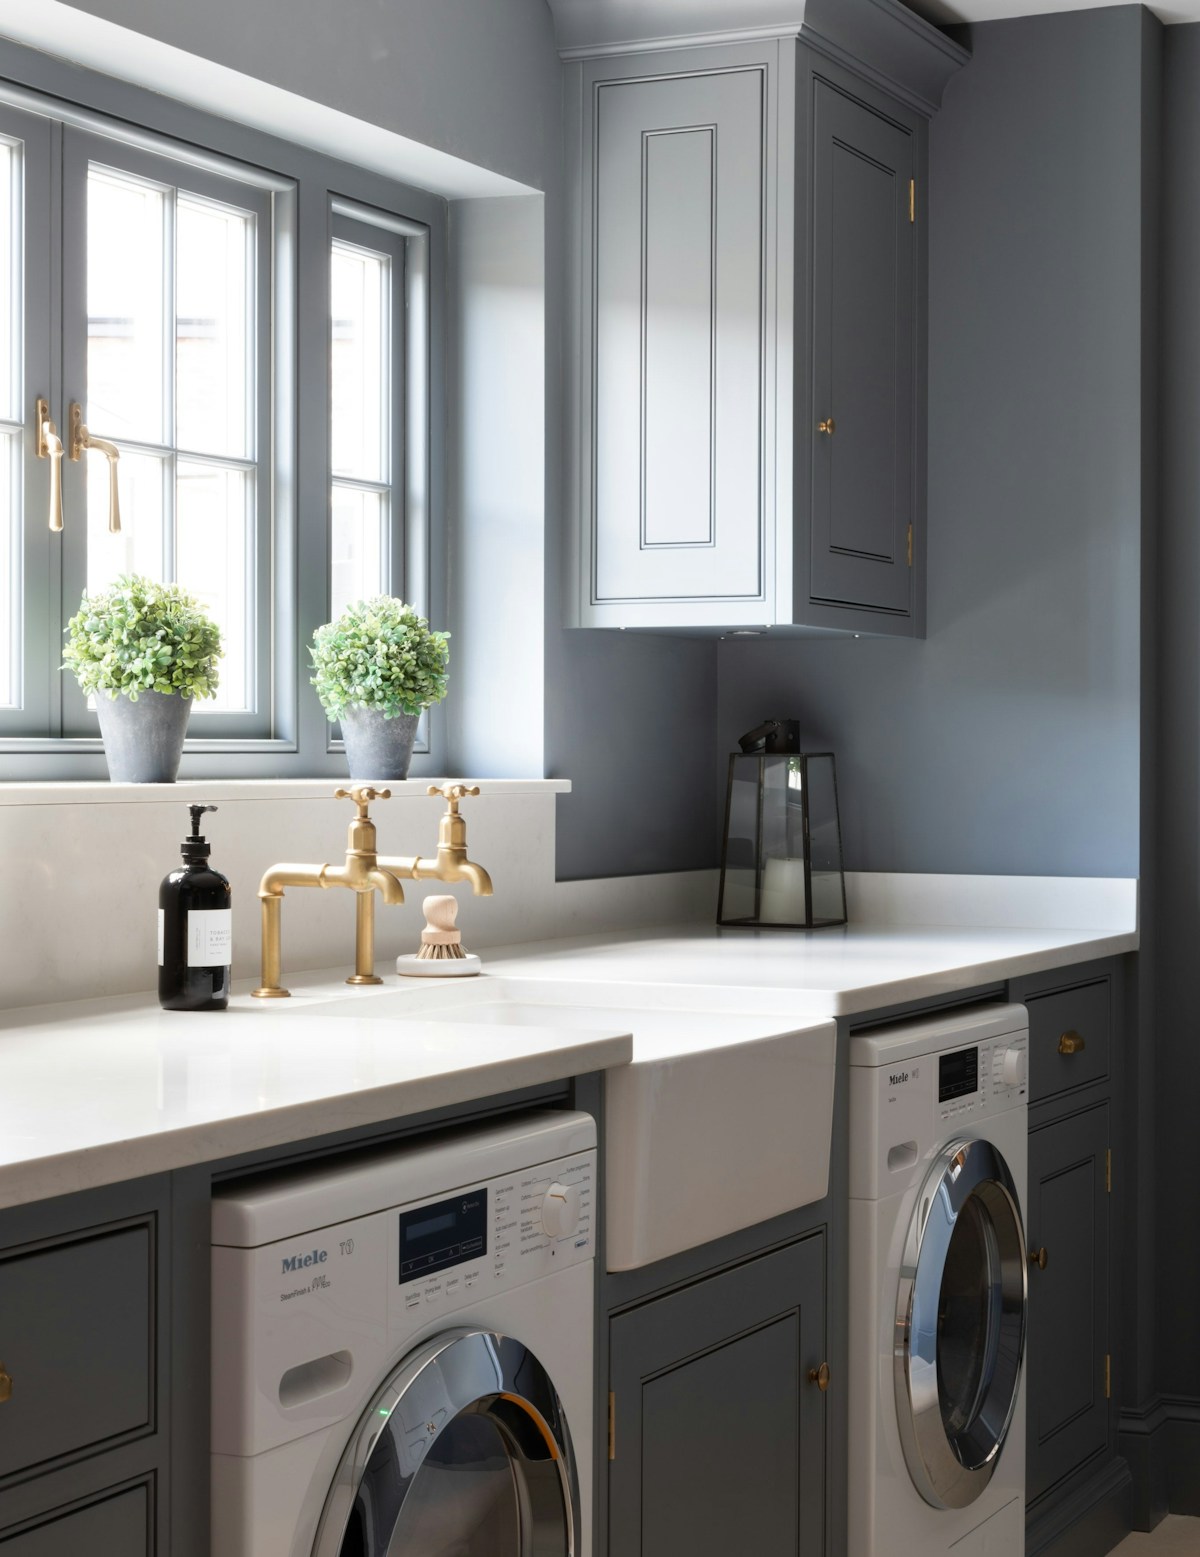 Utility Rooms vs Laundry Rooms: What is the difference? A Detailed Comparison - LuxDeco.com